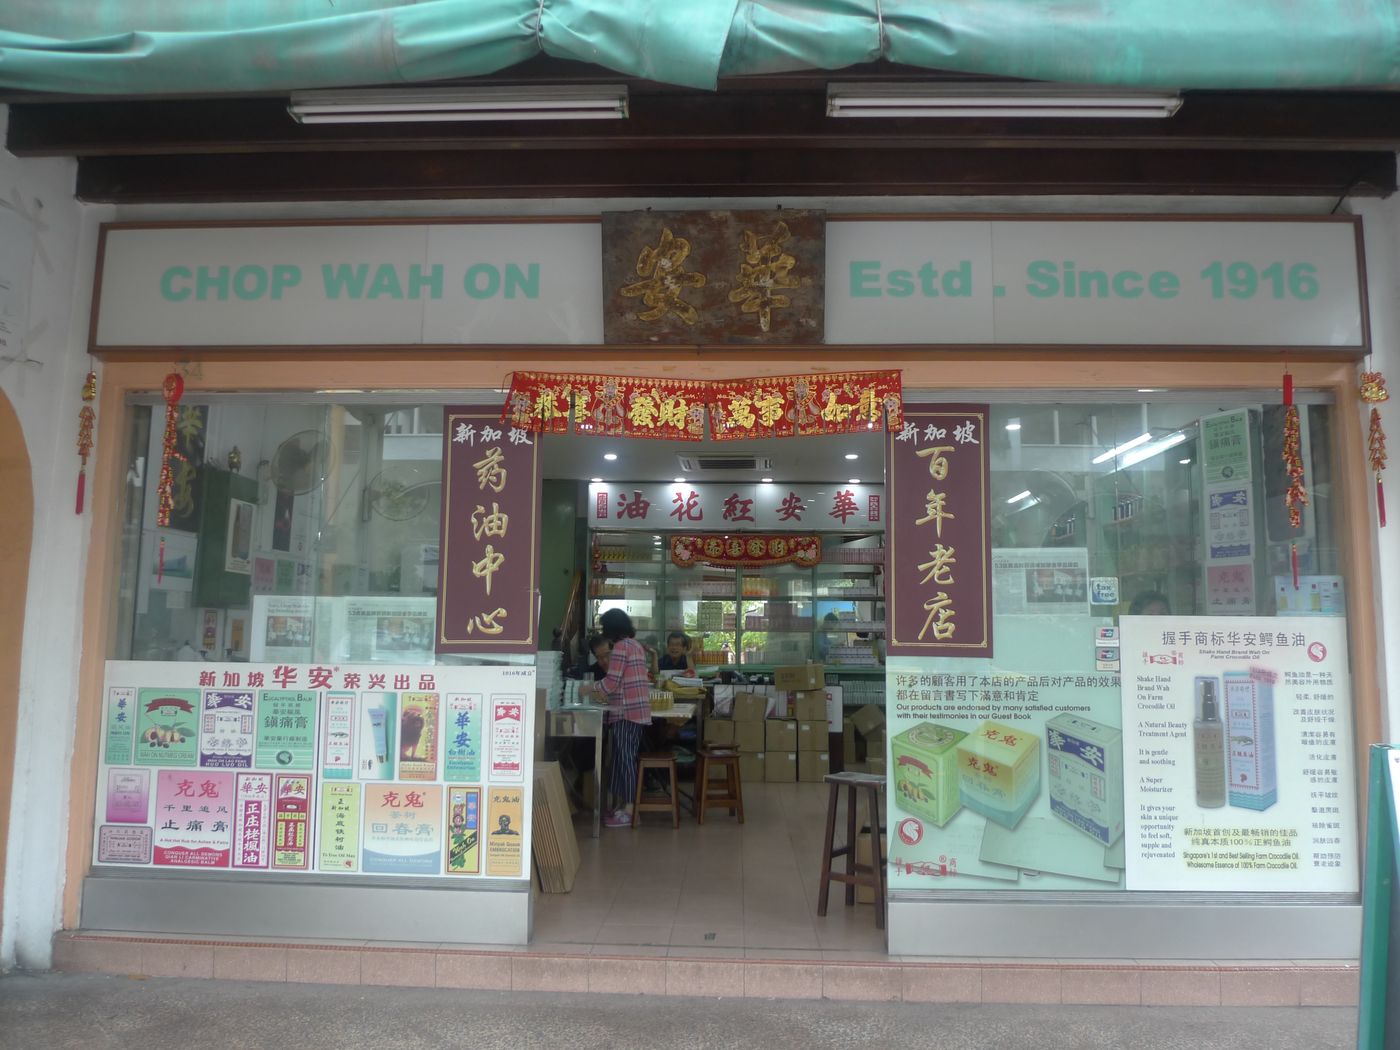 The storefront of Chop Wah On. 